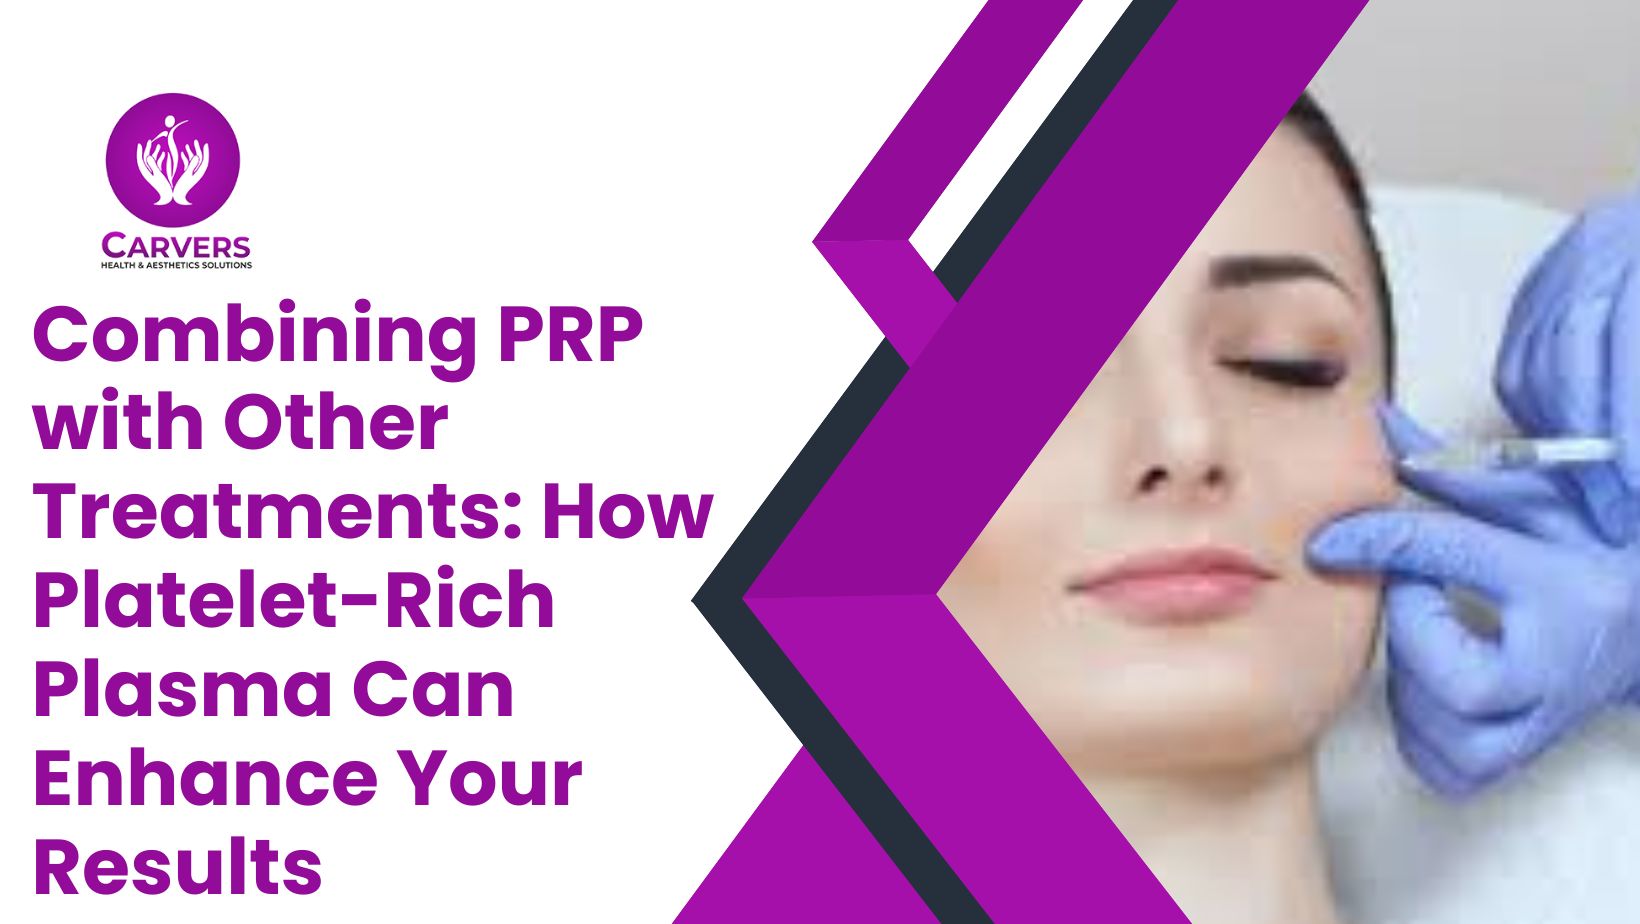 Combining PRP With Other Treatments: How Platelet-Rich Plasma Can Enhance Your Results